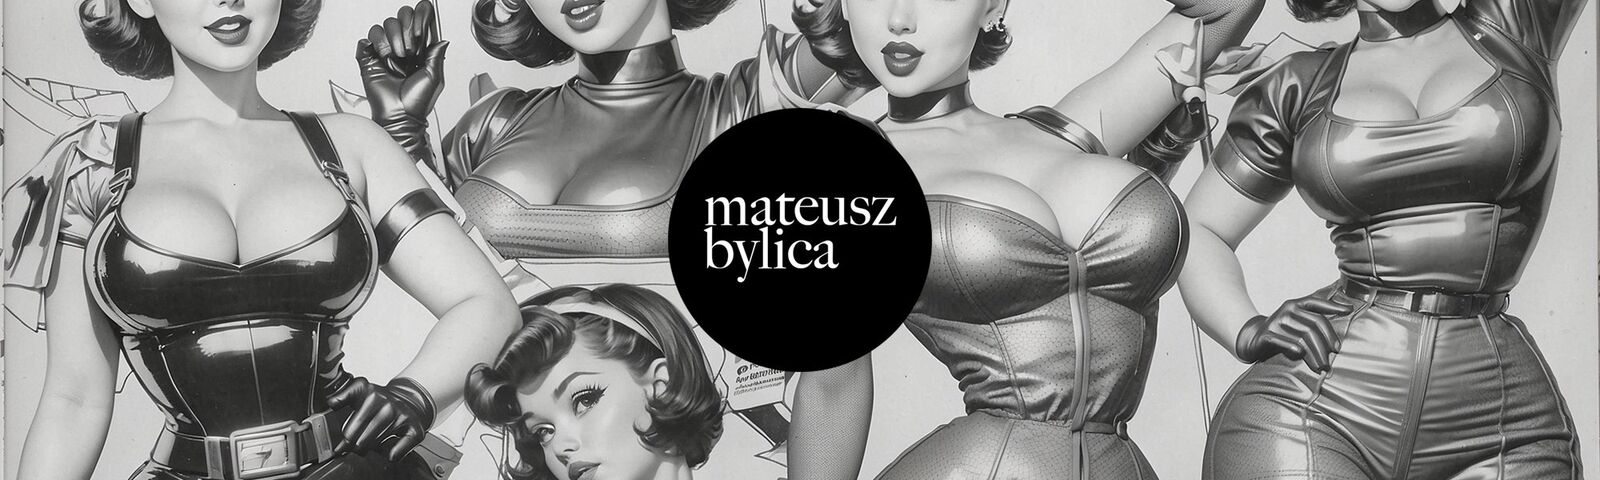 See Mateusz Bylica profile